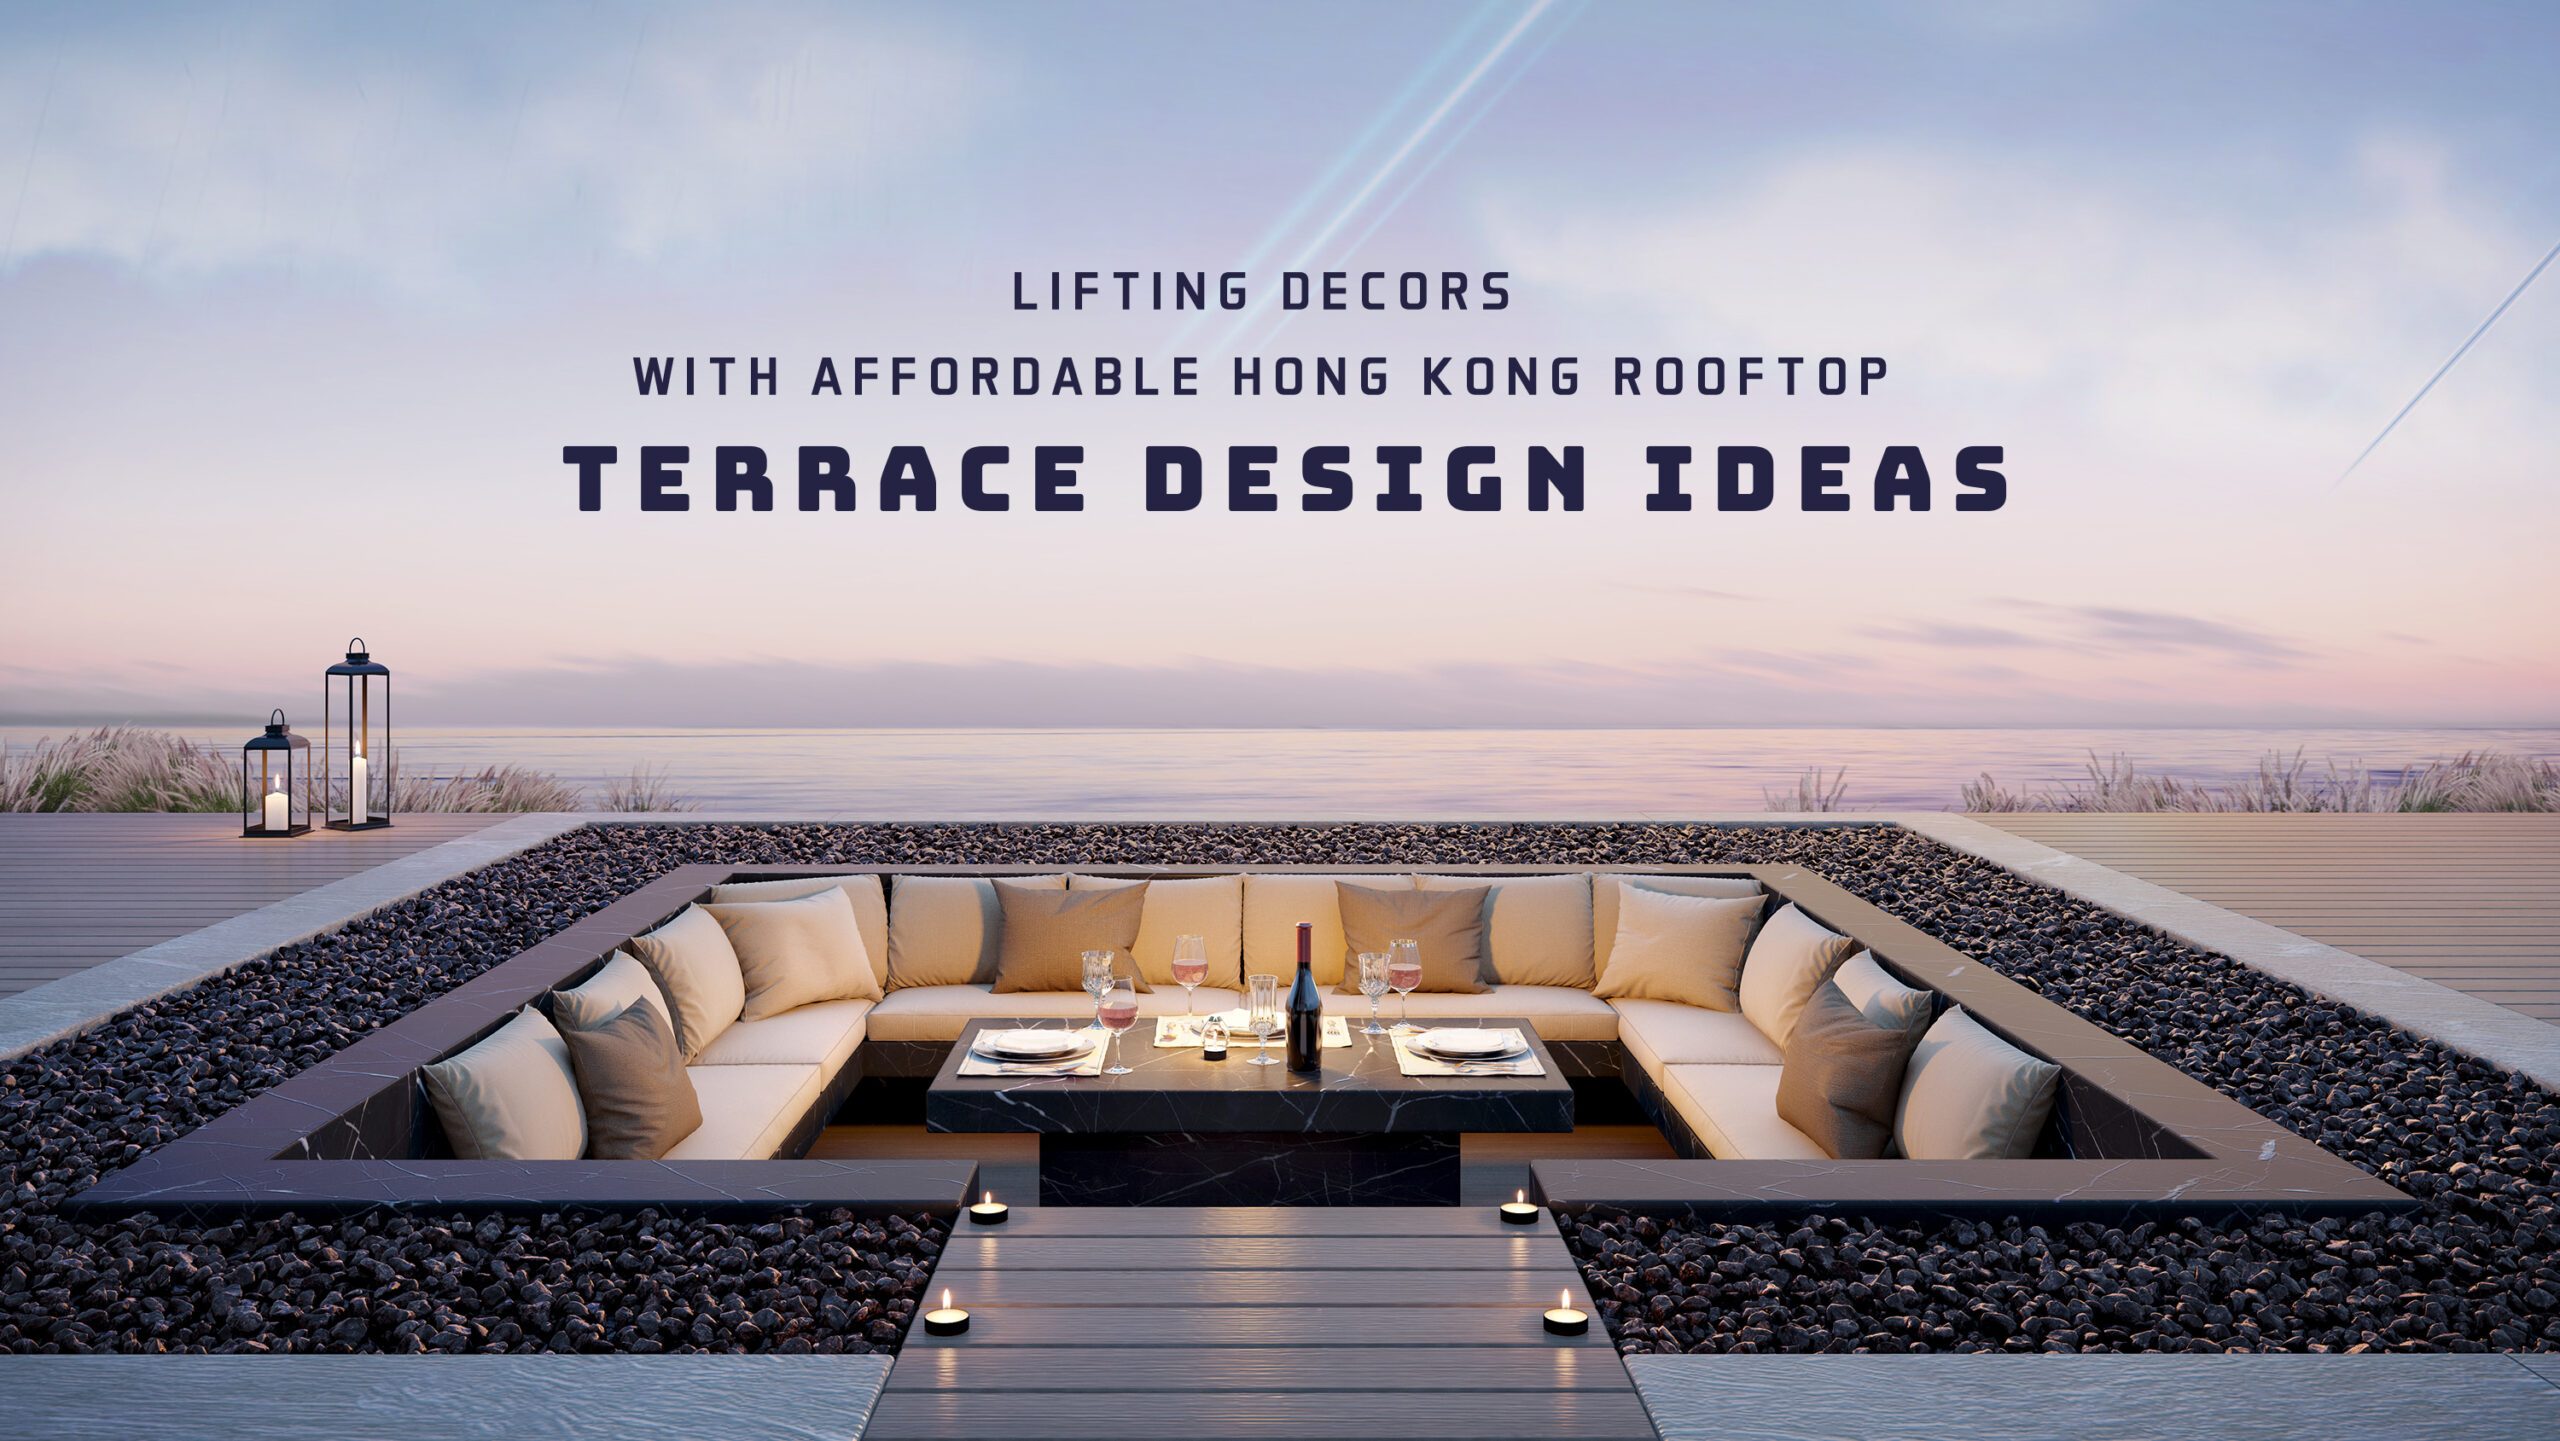 Lifting Decors with Affordable Hong Kong Rooftop Terrace Design Ideas